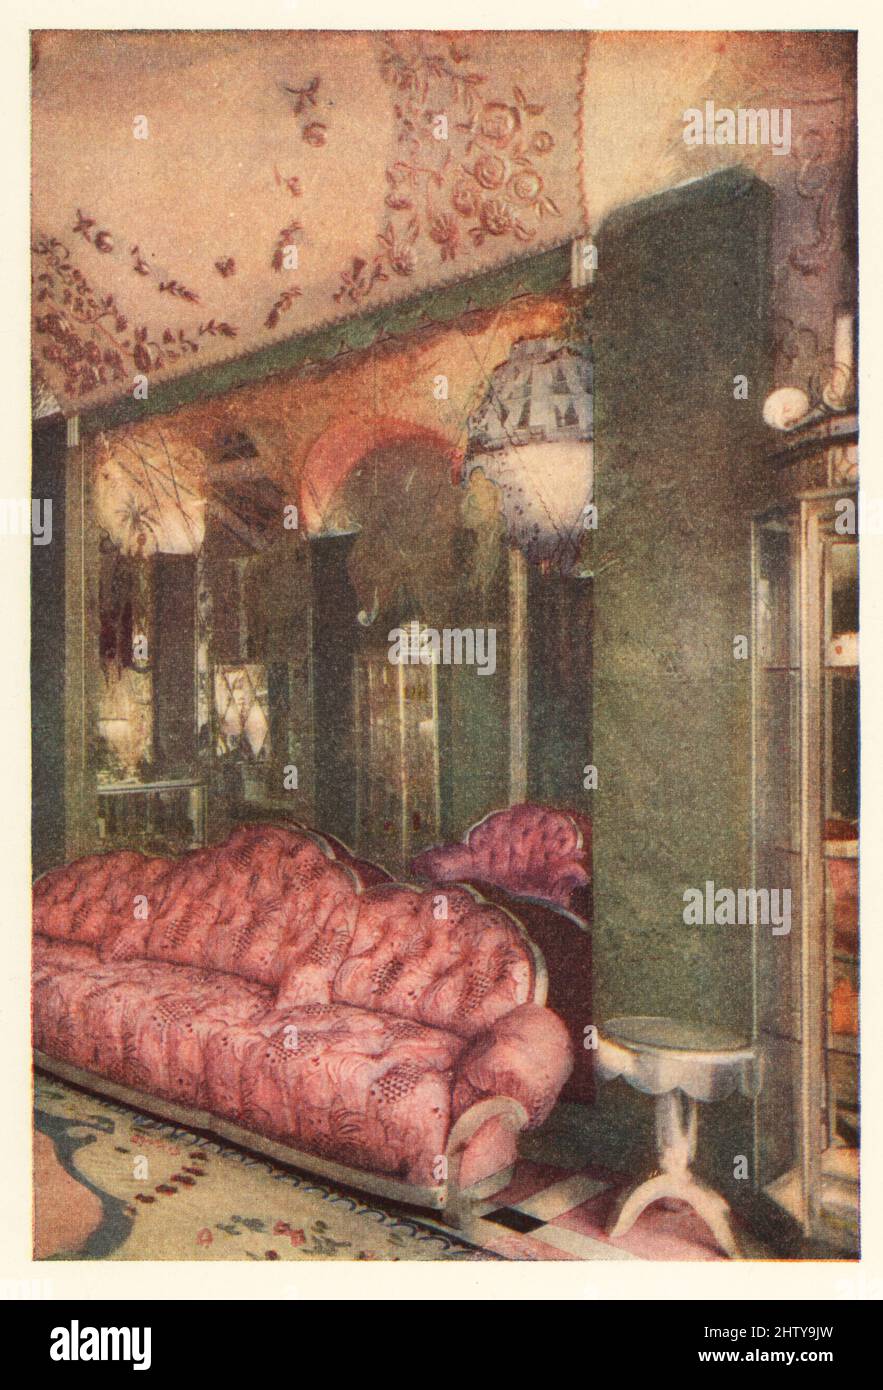 Art Deco interior of the Richard Hudnut shop, rue de la Paix, Paris, 1928. A large pink sofa under a mirror, glass chandelier, and pink ceiling. Smithsonian-process colour print from Richard le Gallienne’s Romance of Perfume, Hudnut, New York, 1928. Stock Photo